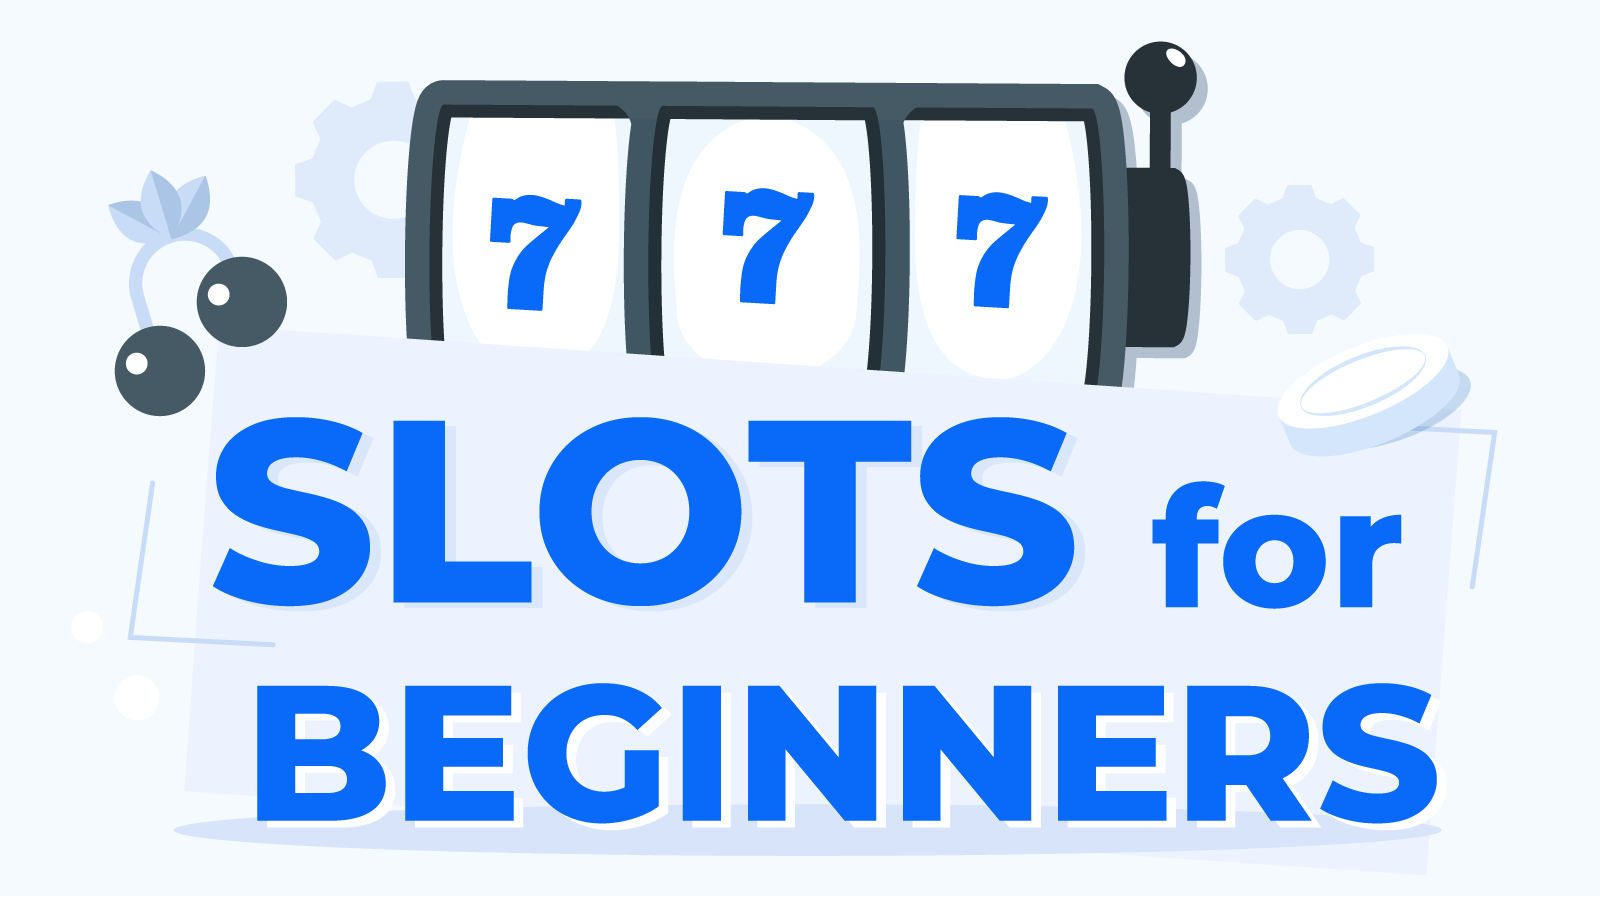 Online Slots Guide for Beginners